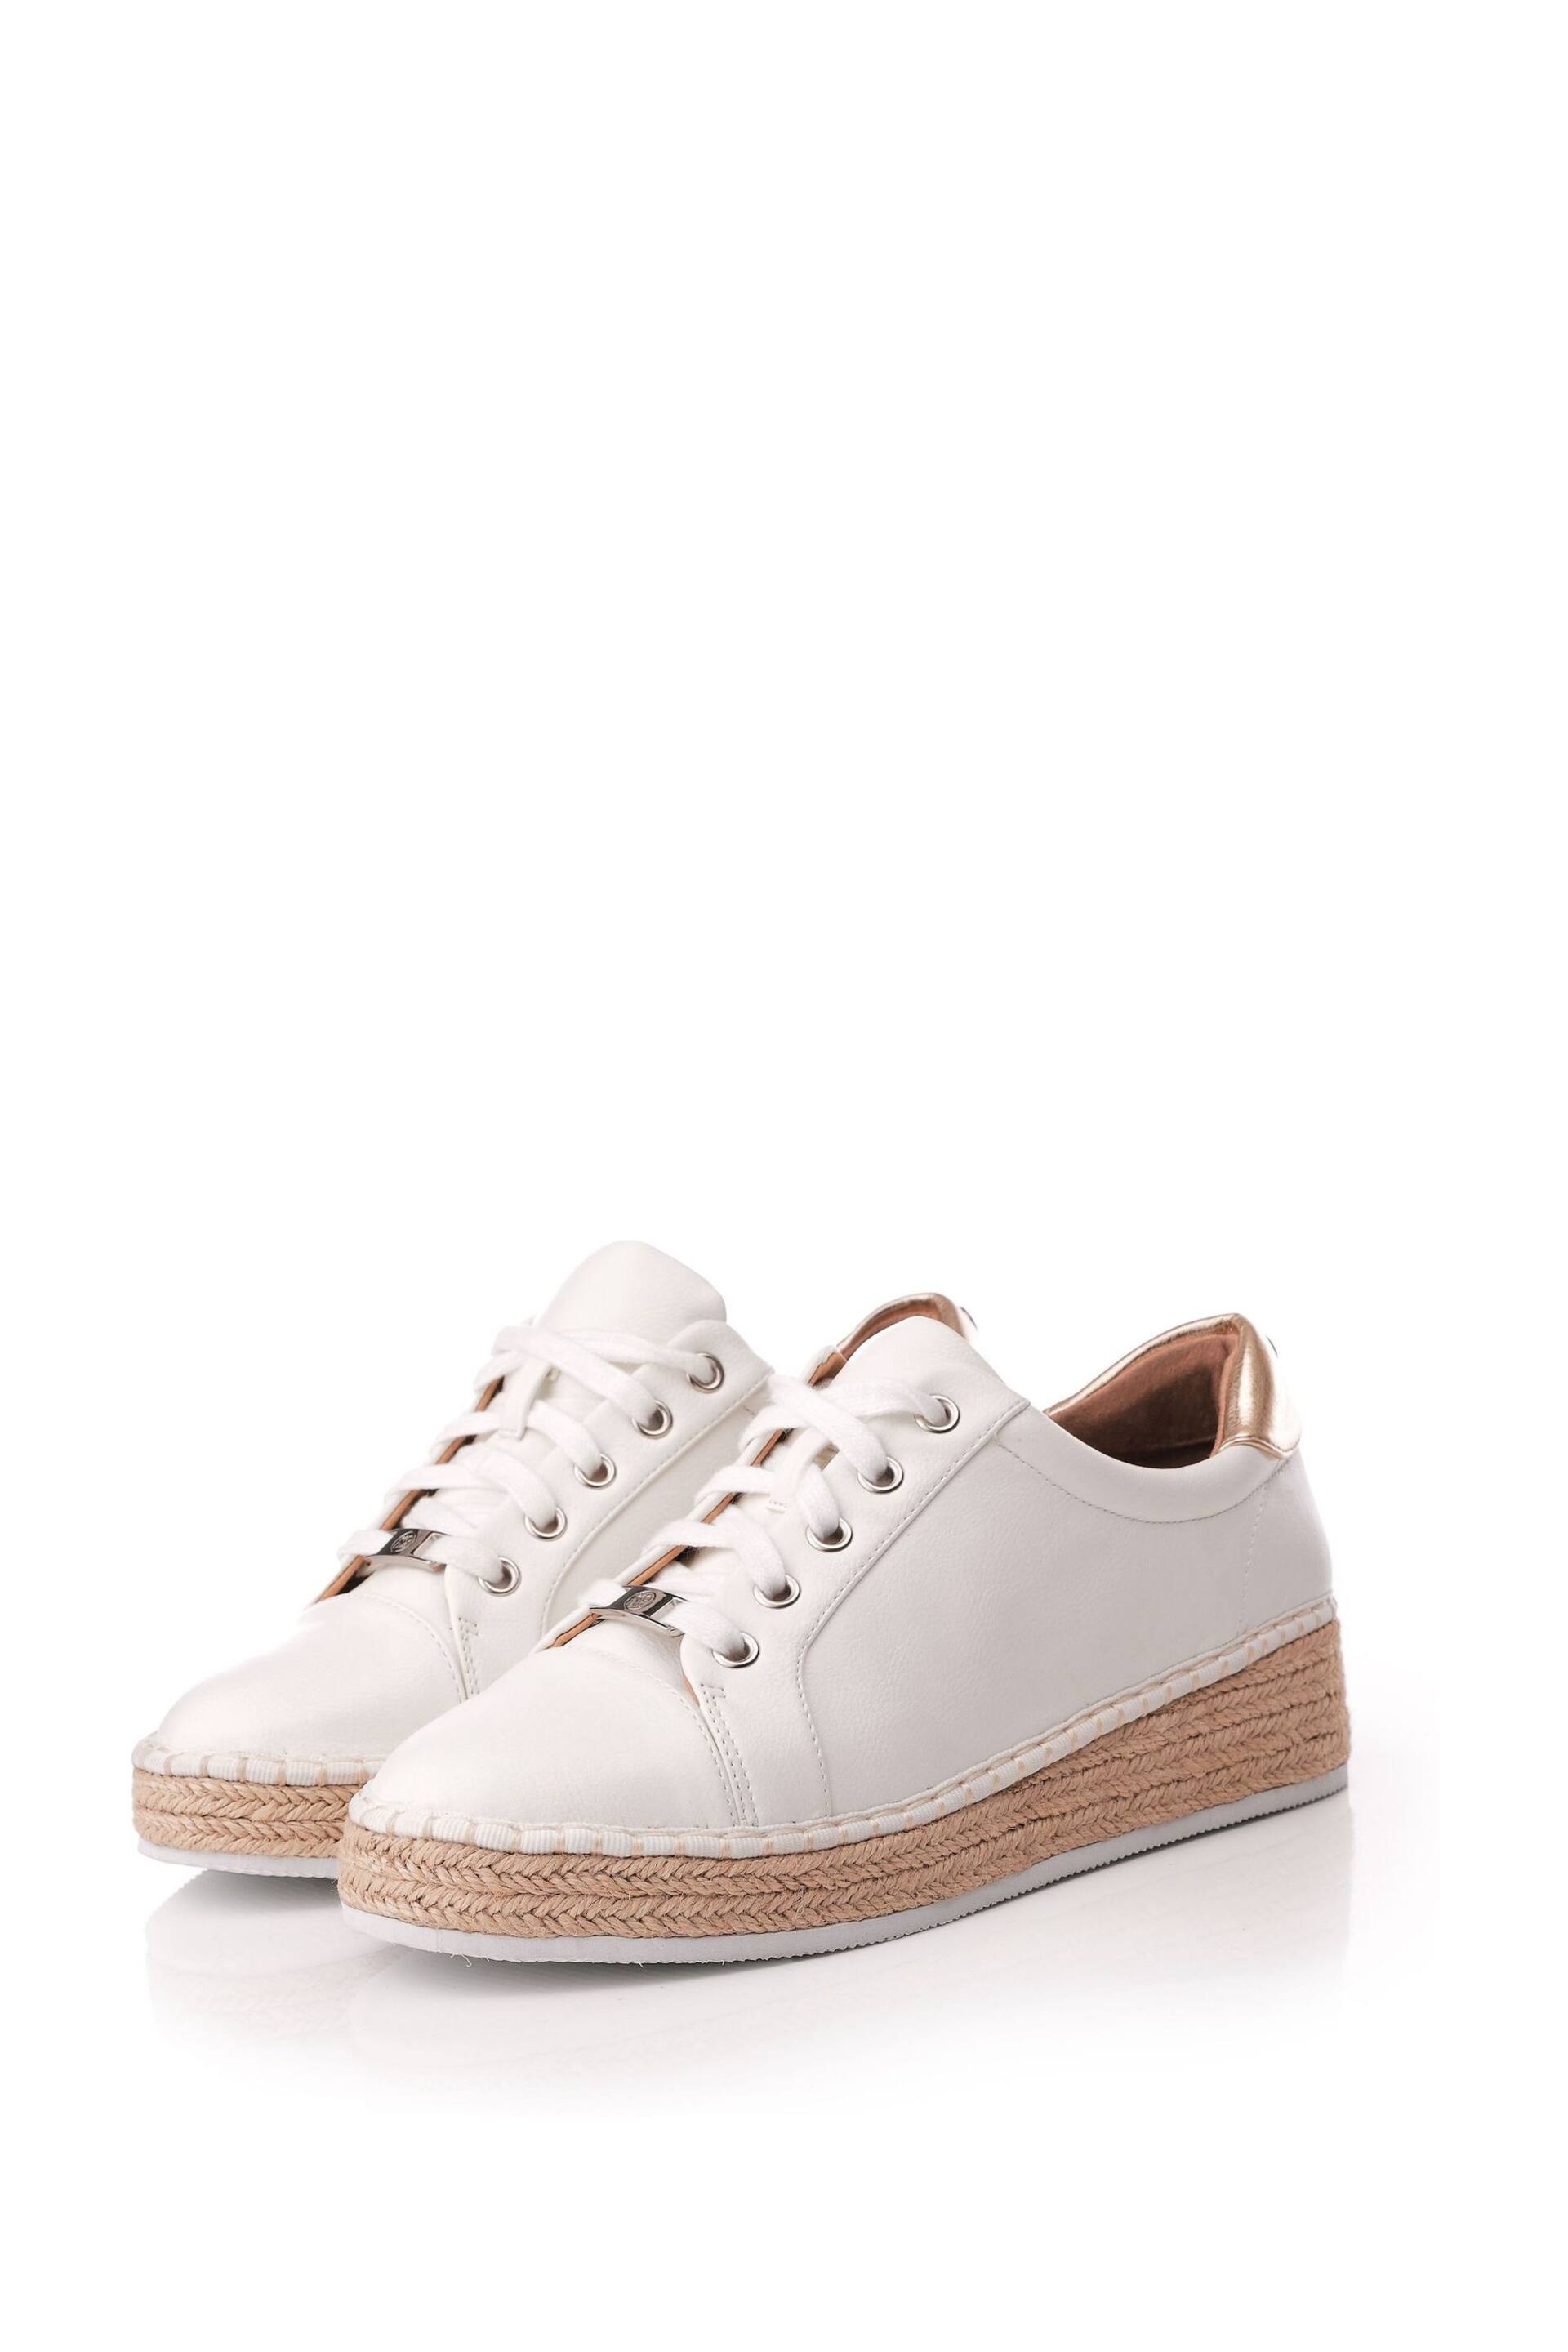 Moda in Pelle Mini Breely Wedges Woven Sole White Trainers - Image 2 of 4